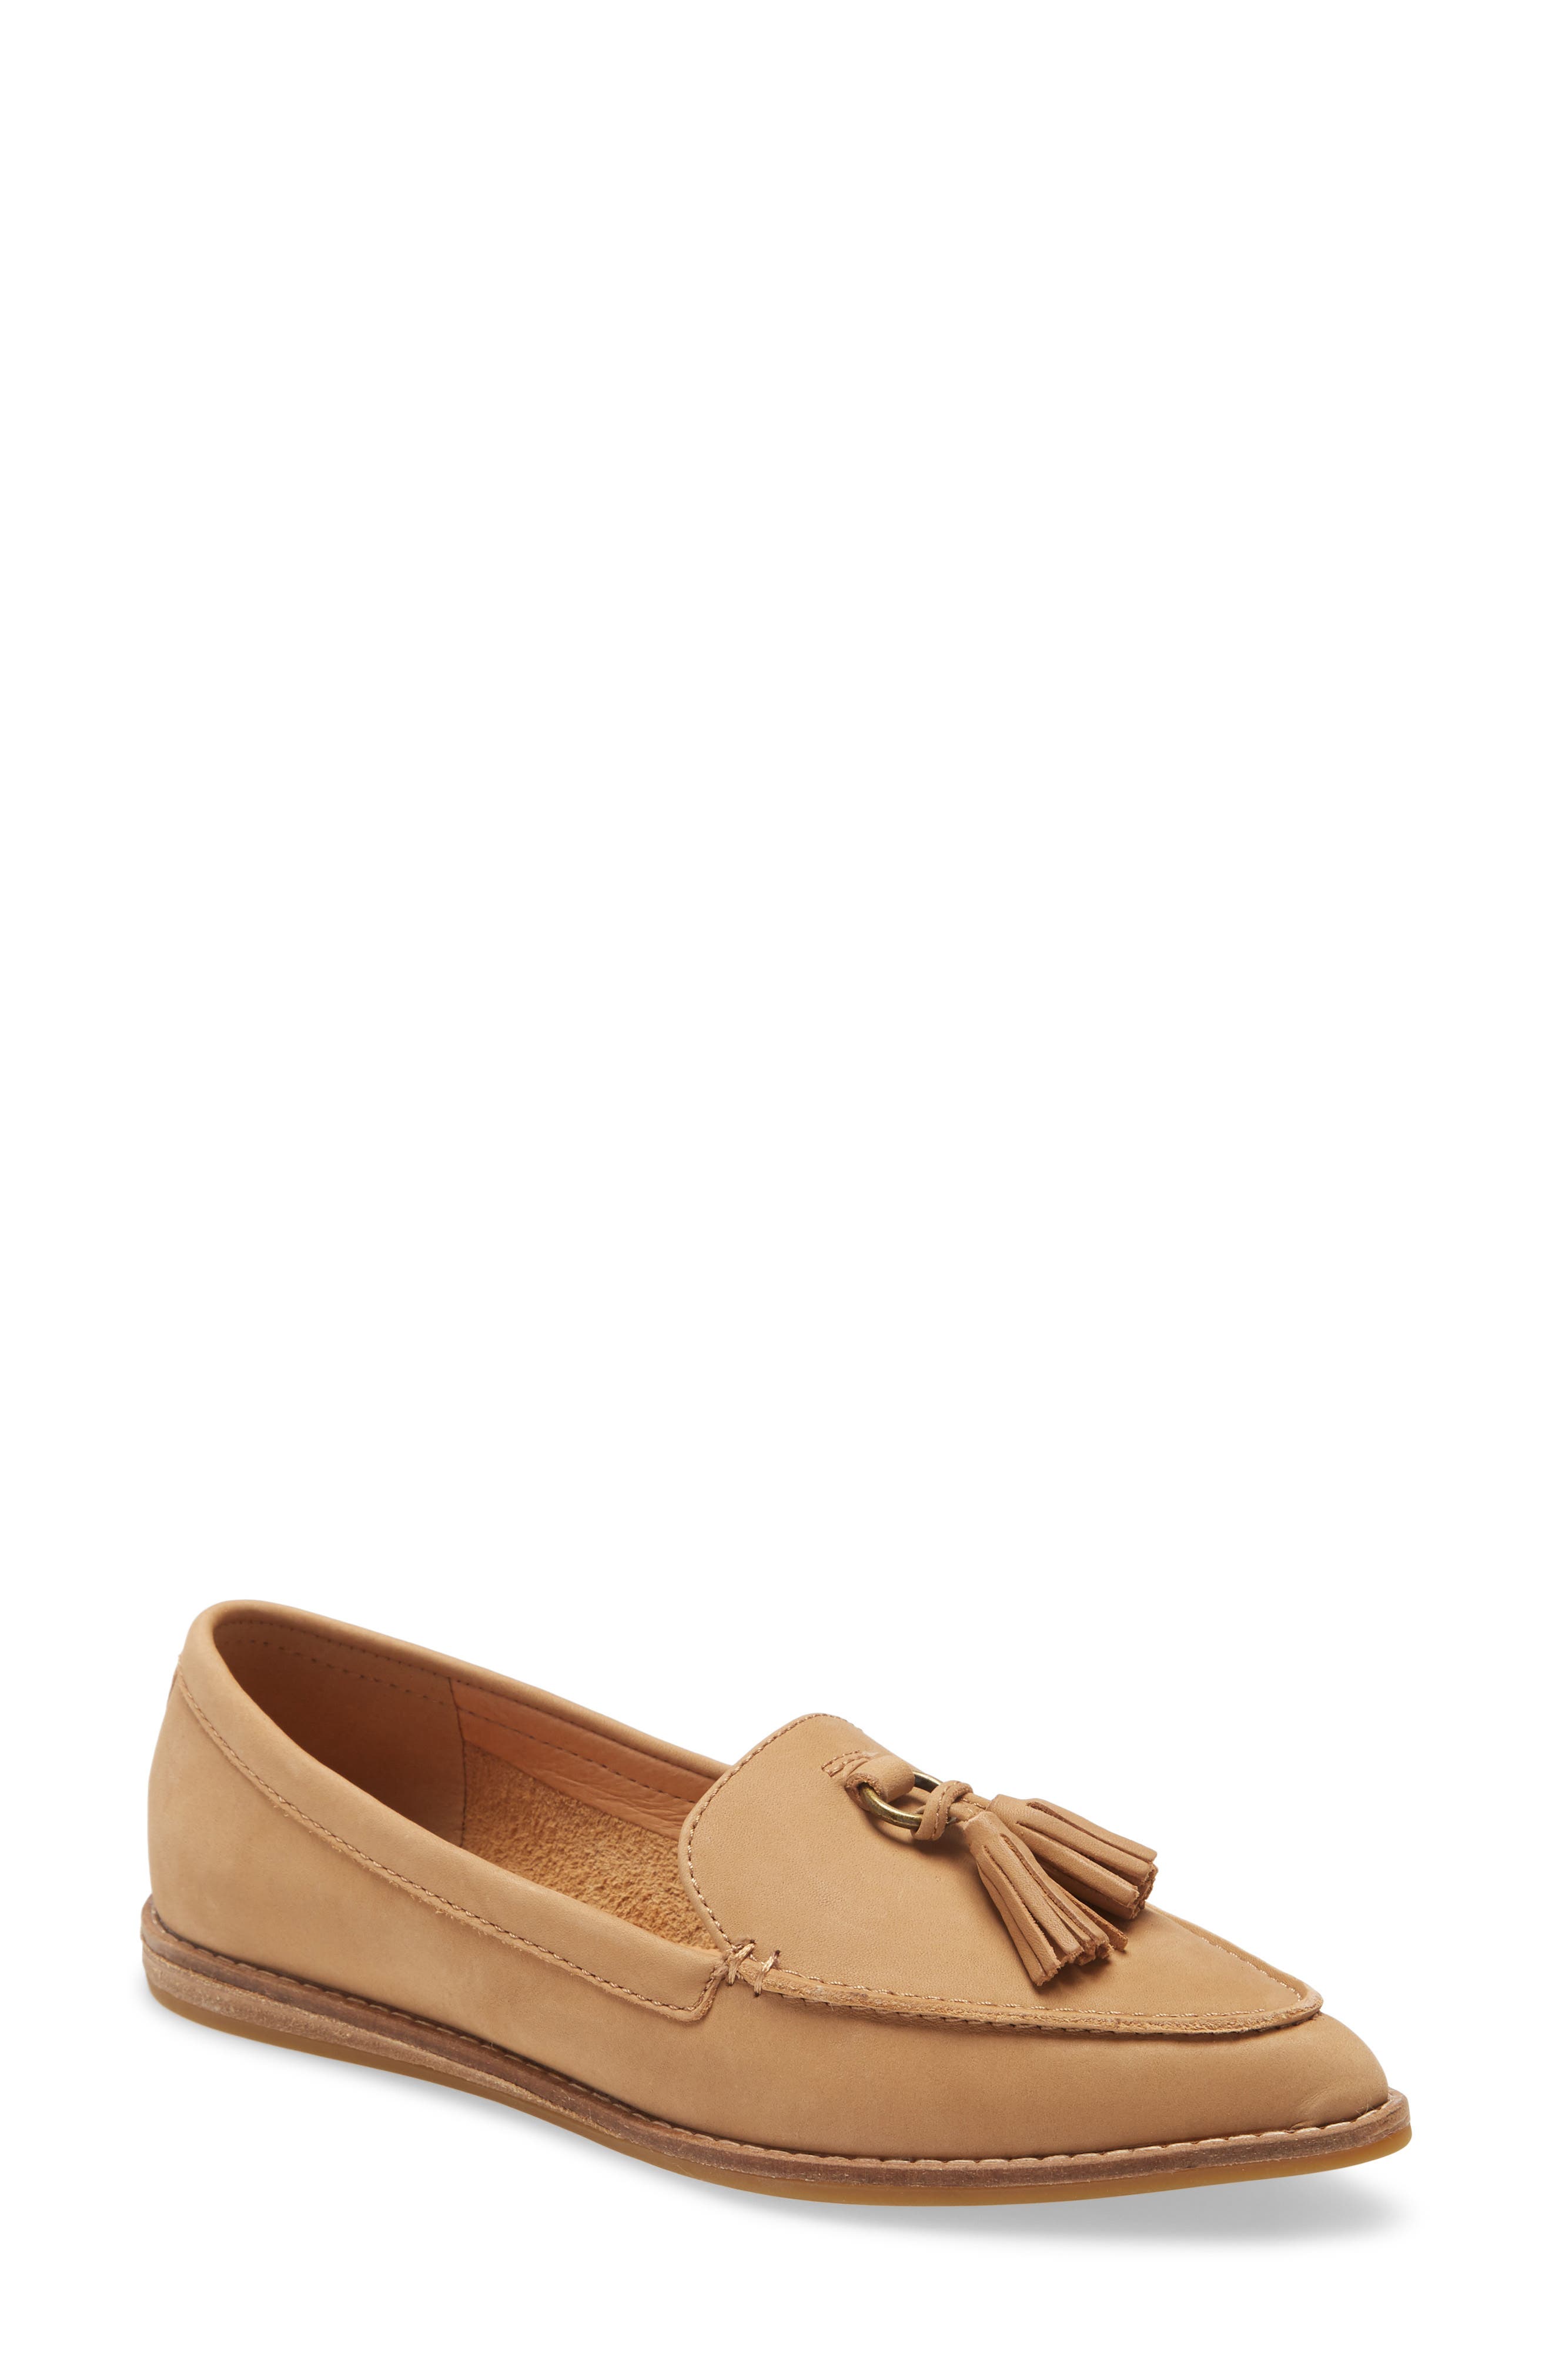 Women's Sperry Shoes | Nordstrom